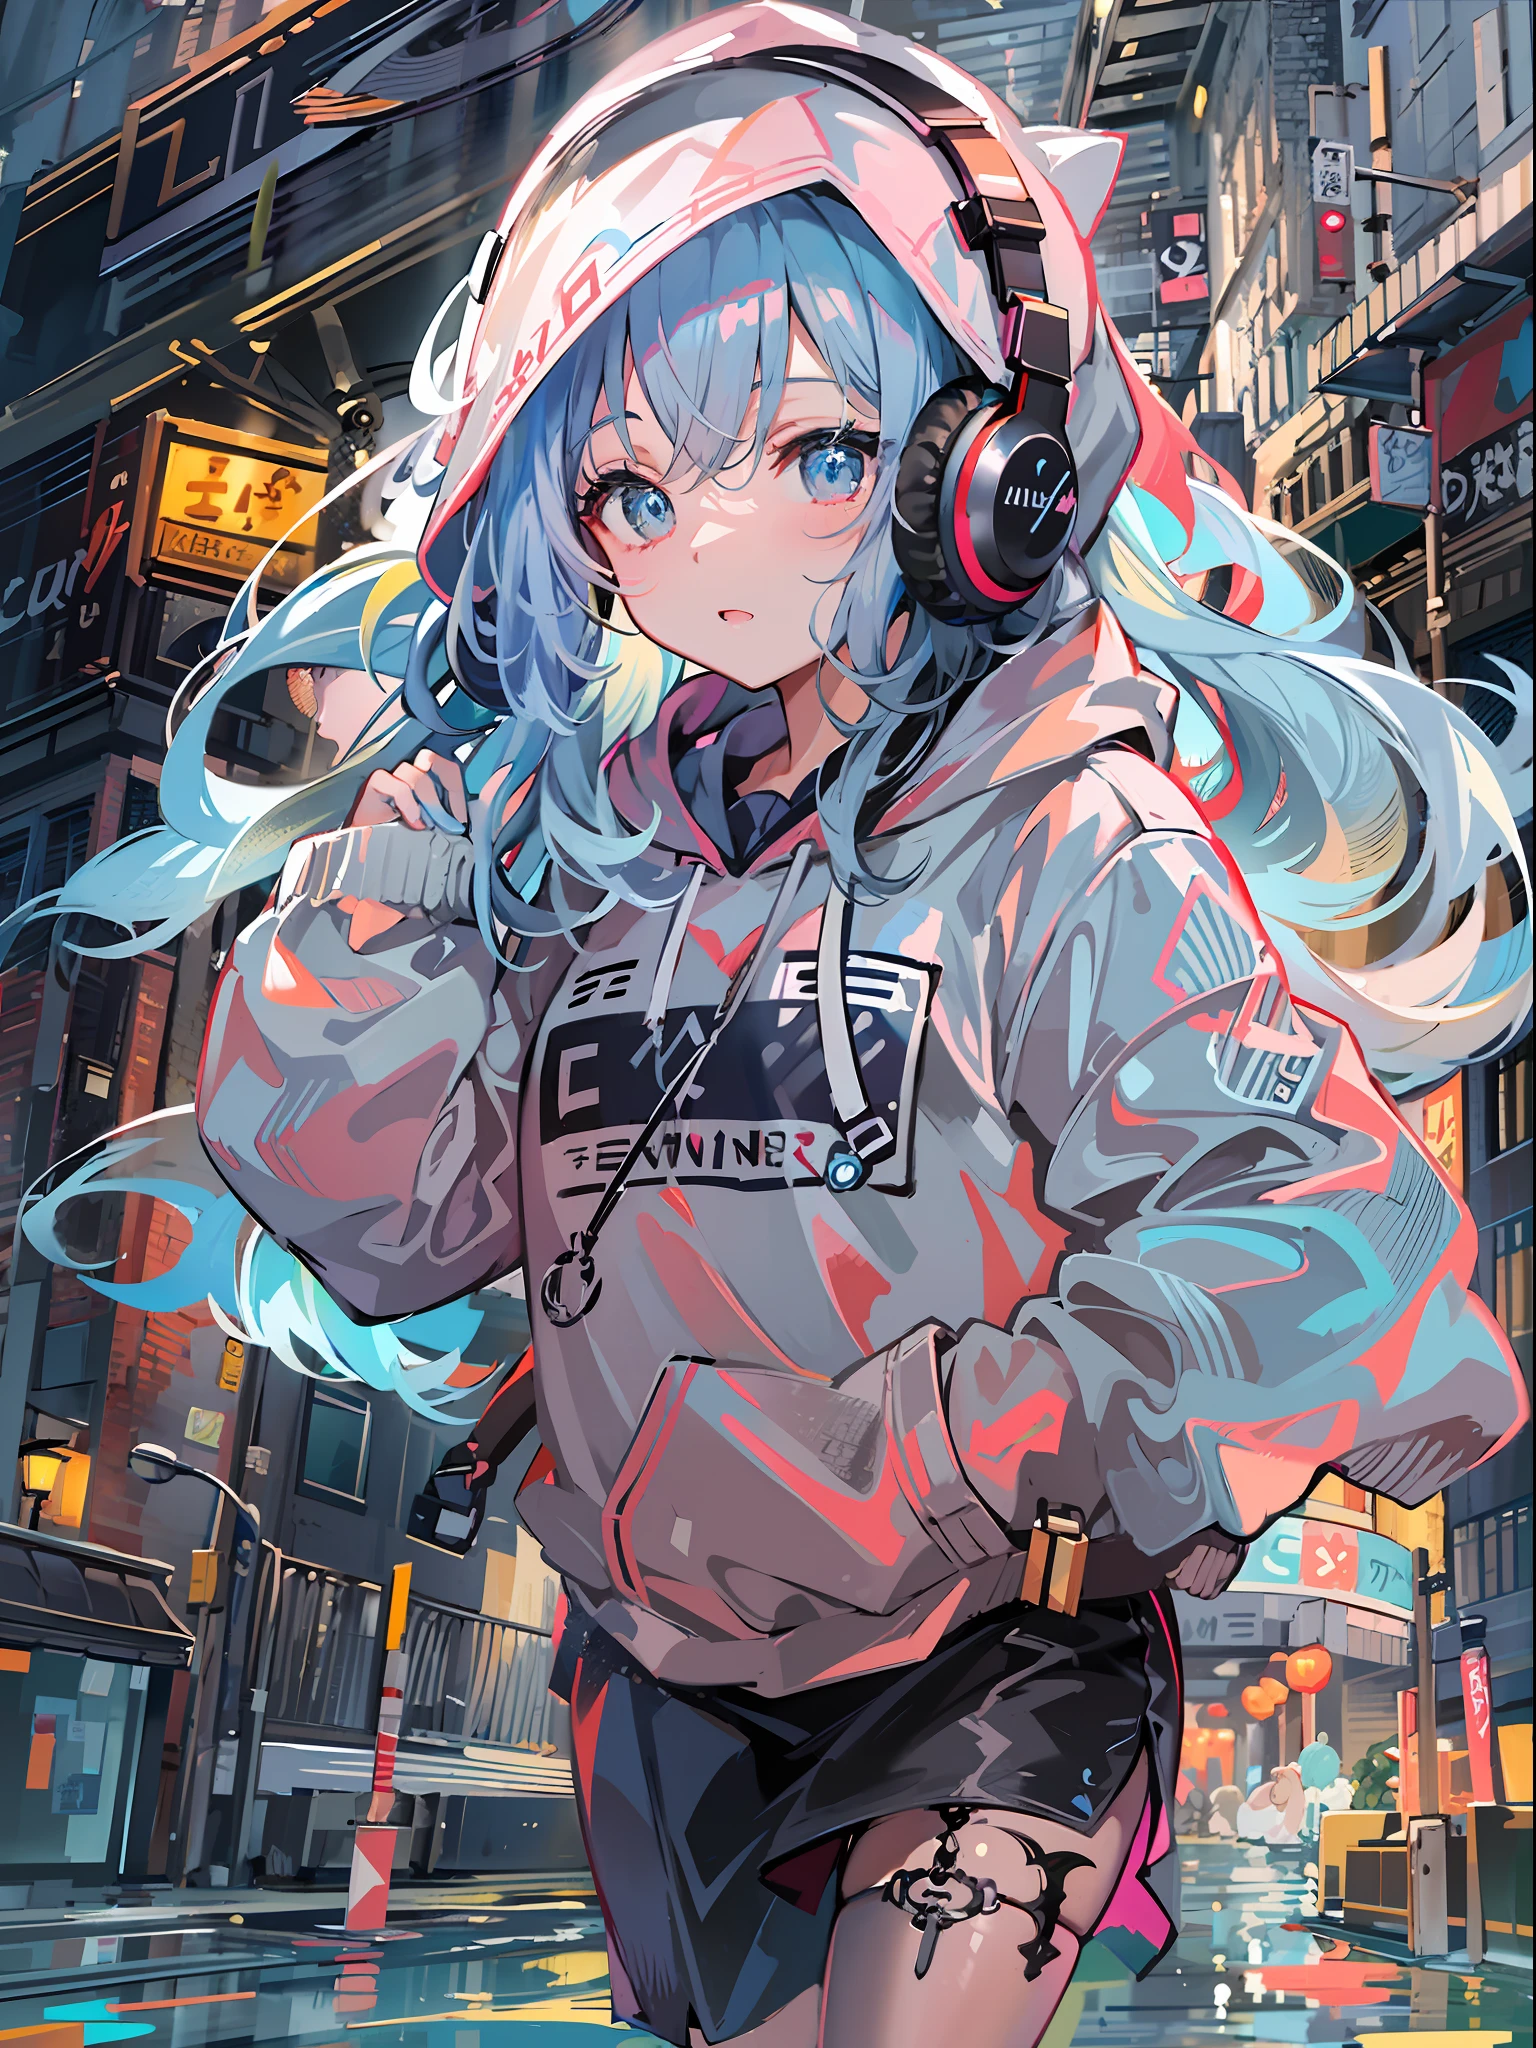 8k resolution、((top-quality))、((​masterpiece))、((ultra-detailliert))、1 woman、solo、incredibly absurdness、Oversized hoodies、headphones、Street、plein air、Sateen、neons、Shortcut Hair、Brightly colored eyes、Hands in pockets、a miniskirt、water dripping